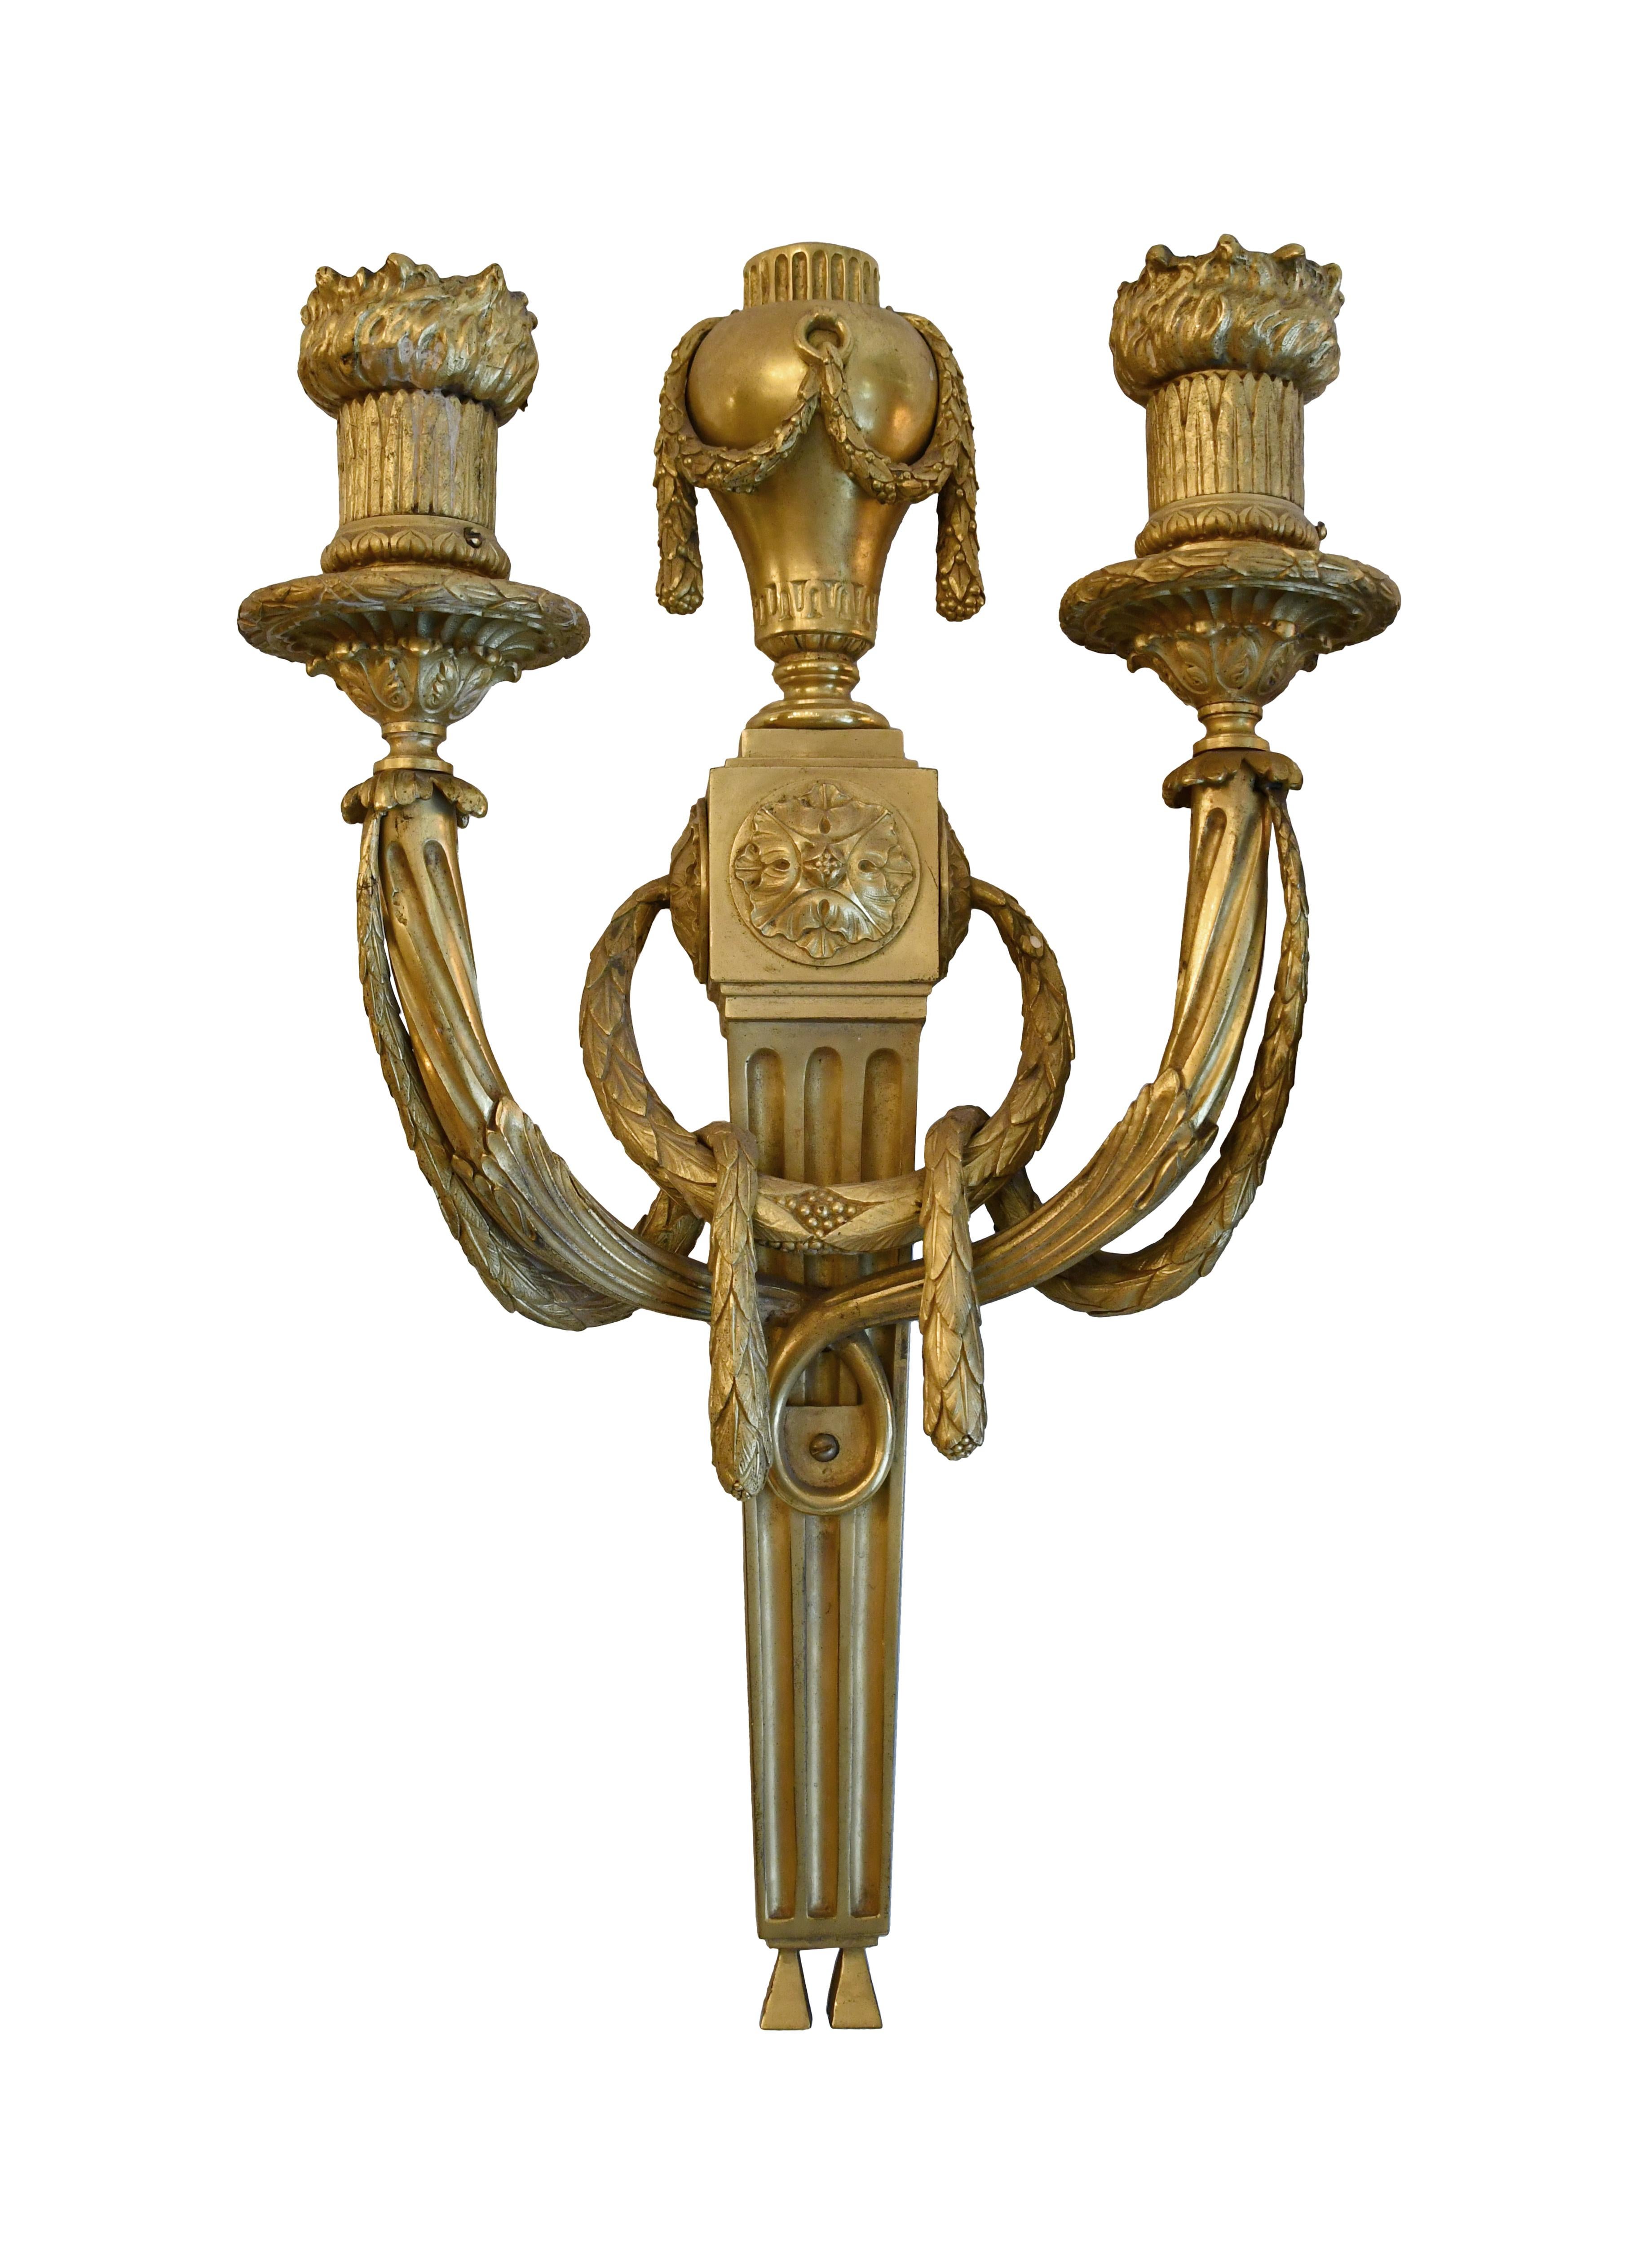 Originally from East 82nd St. in Manhattan, these 1930s exquisite EF Caldwell sconces are a Classic gold gilding over bronze. EF Caldwell & Co. was America’s premier producer of lighting and other metal objects during the turn of the 20th century